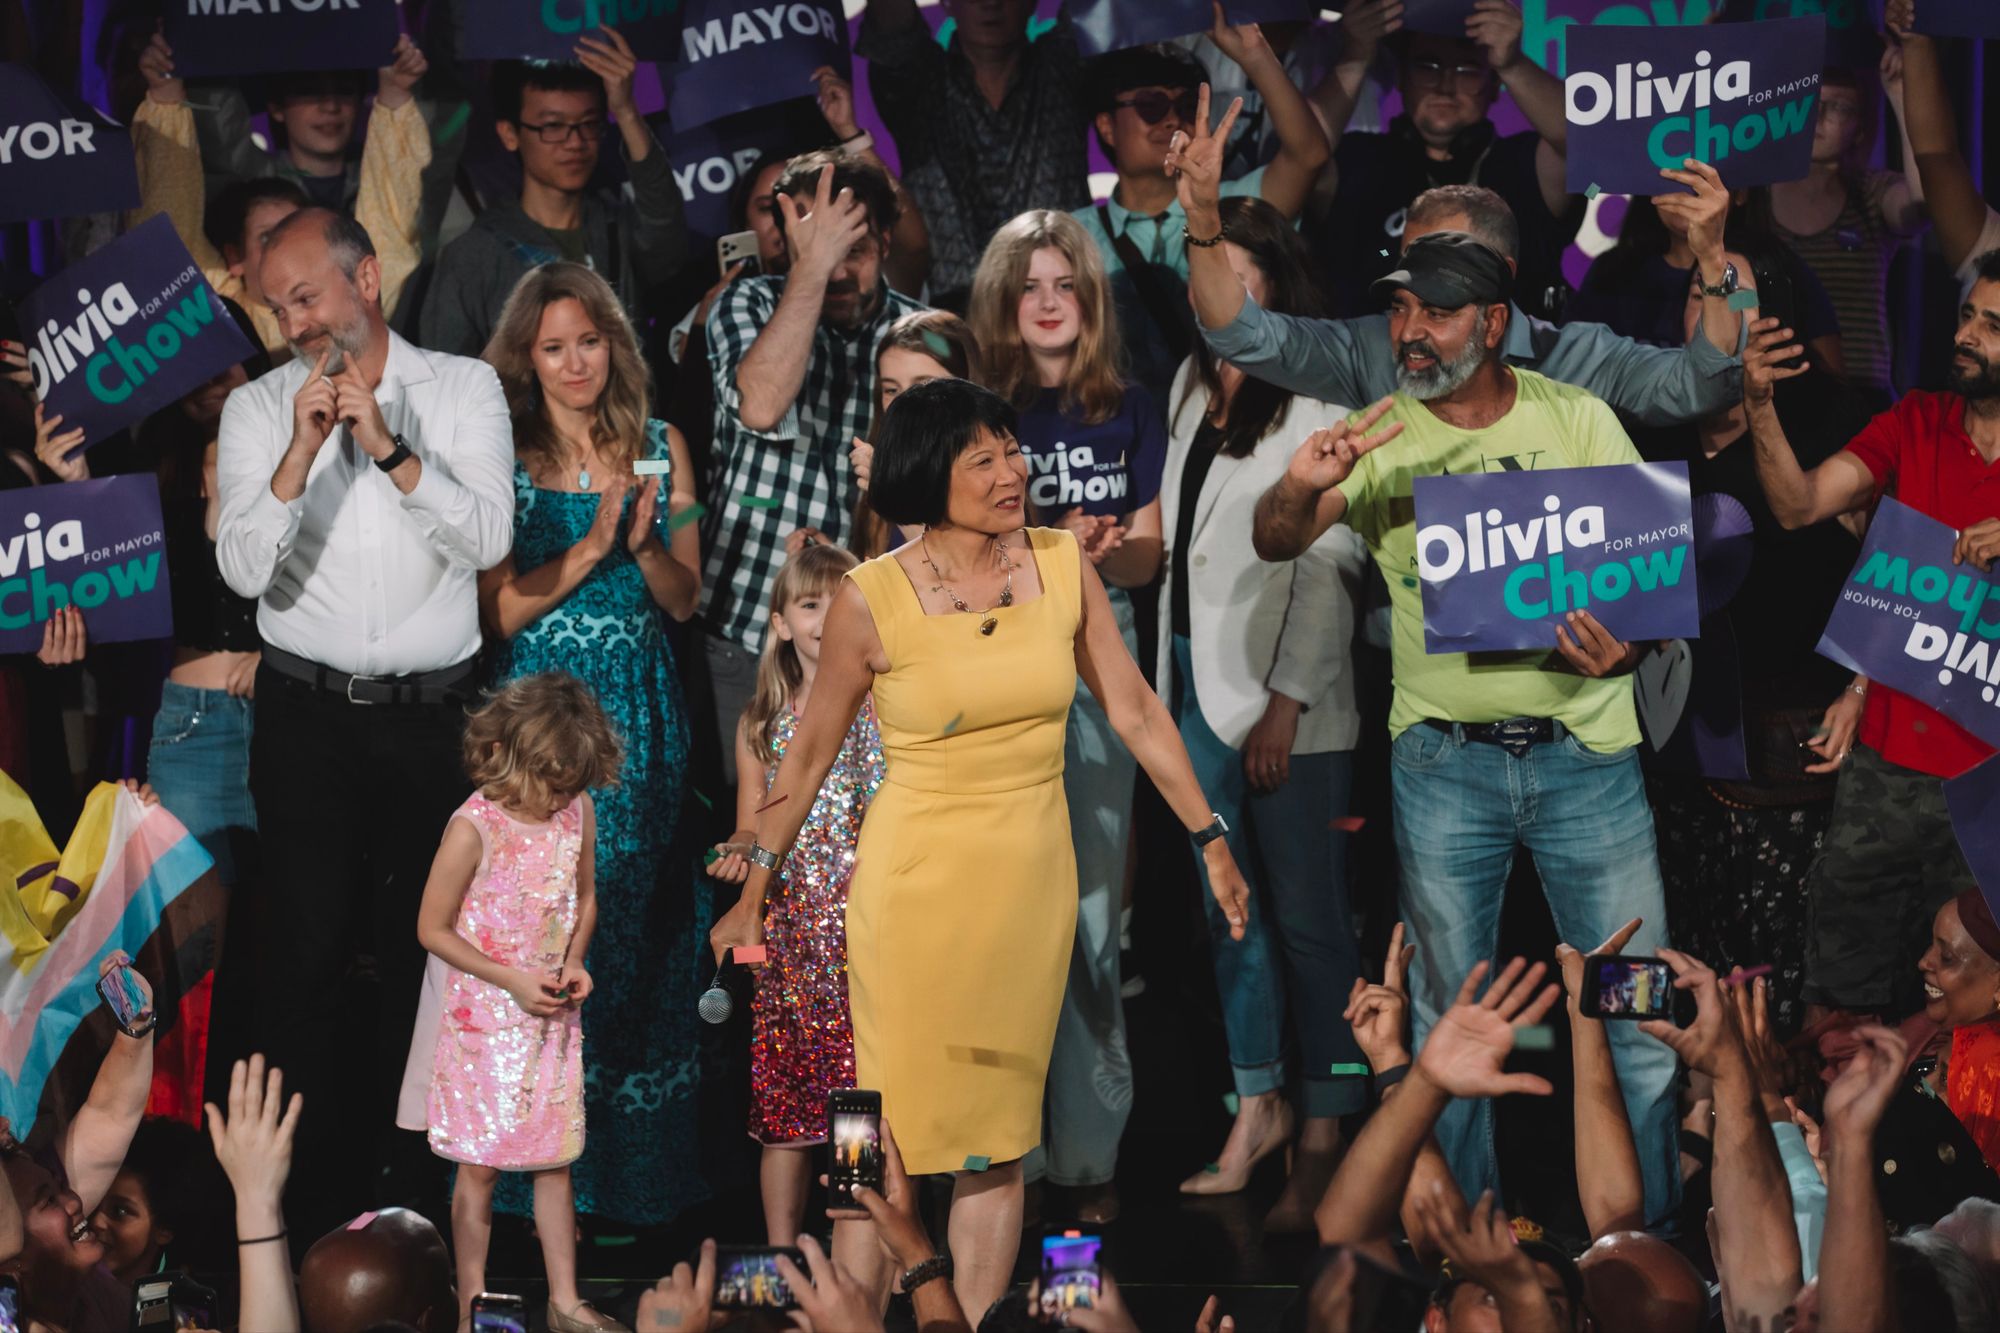 Congrats, Olivia Chow. Now Please Use The Strong Mayor Powers